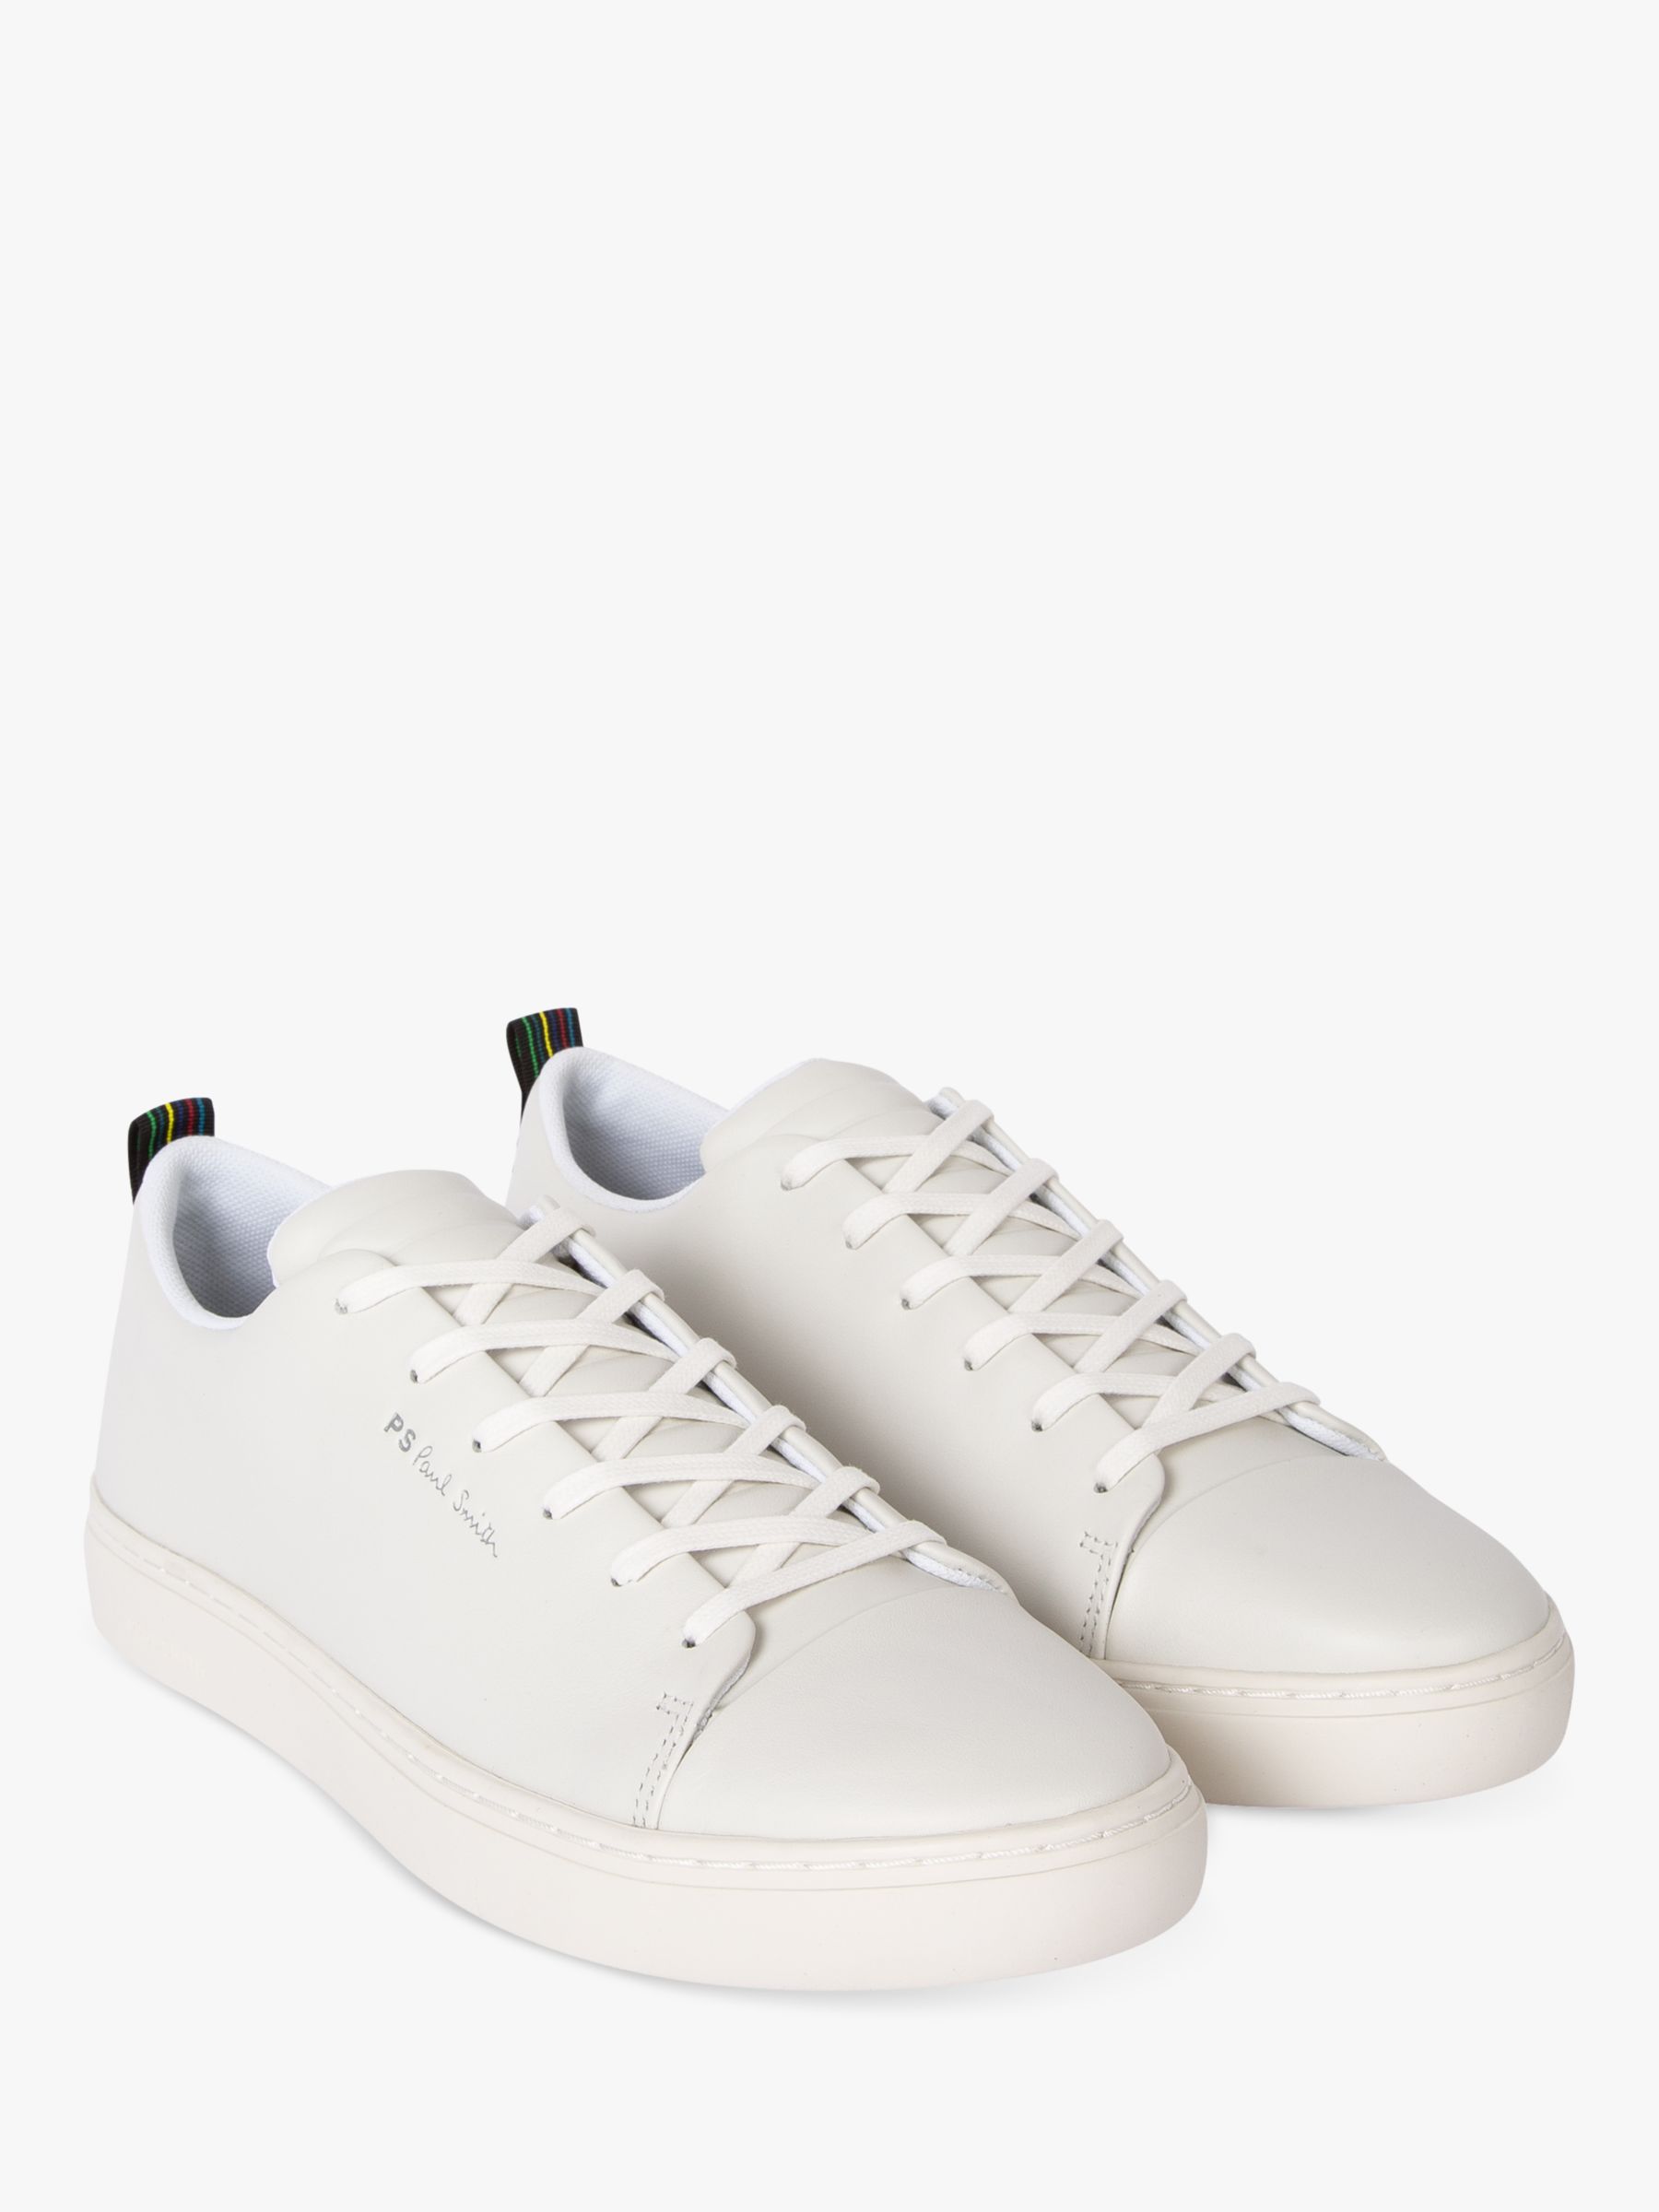 Paul Smith Lee Cupsole Trainers, White, 7